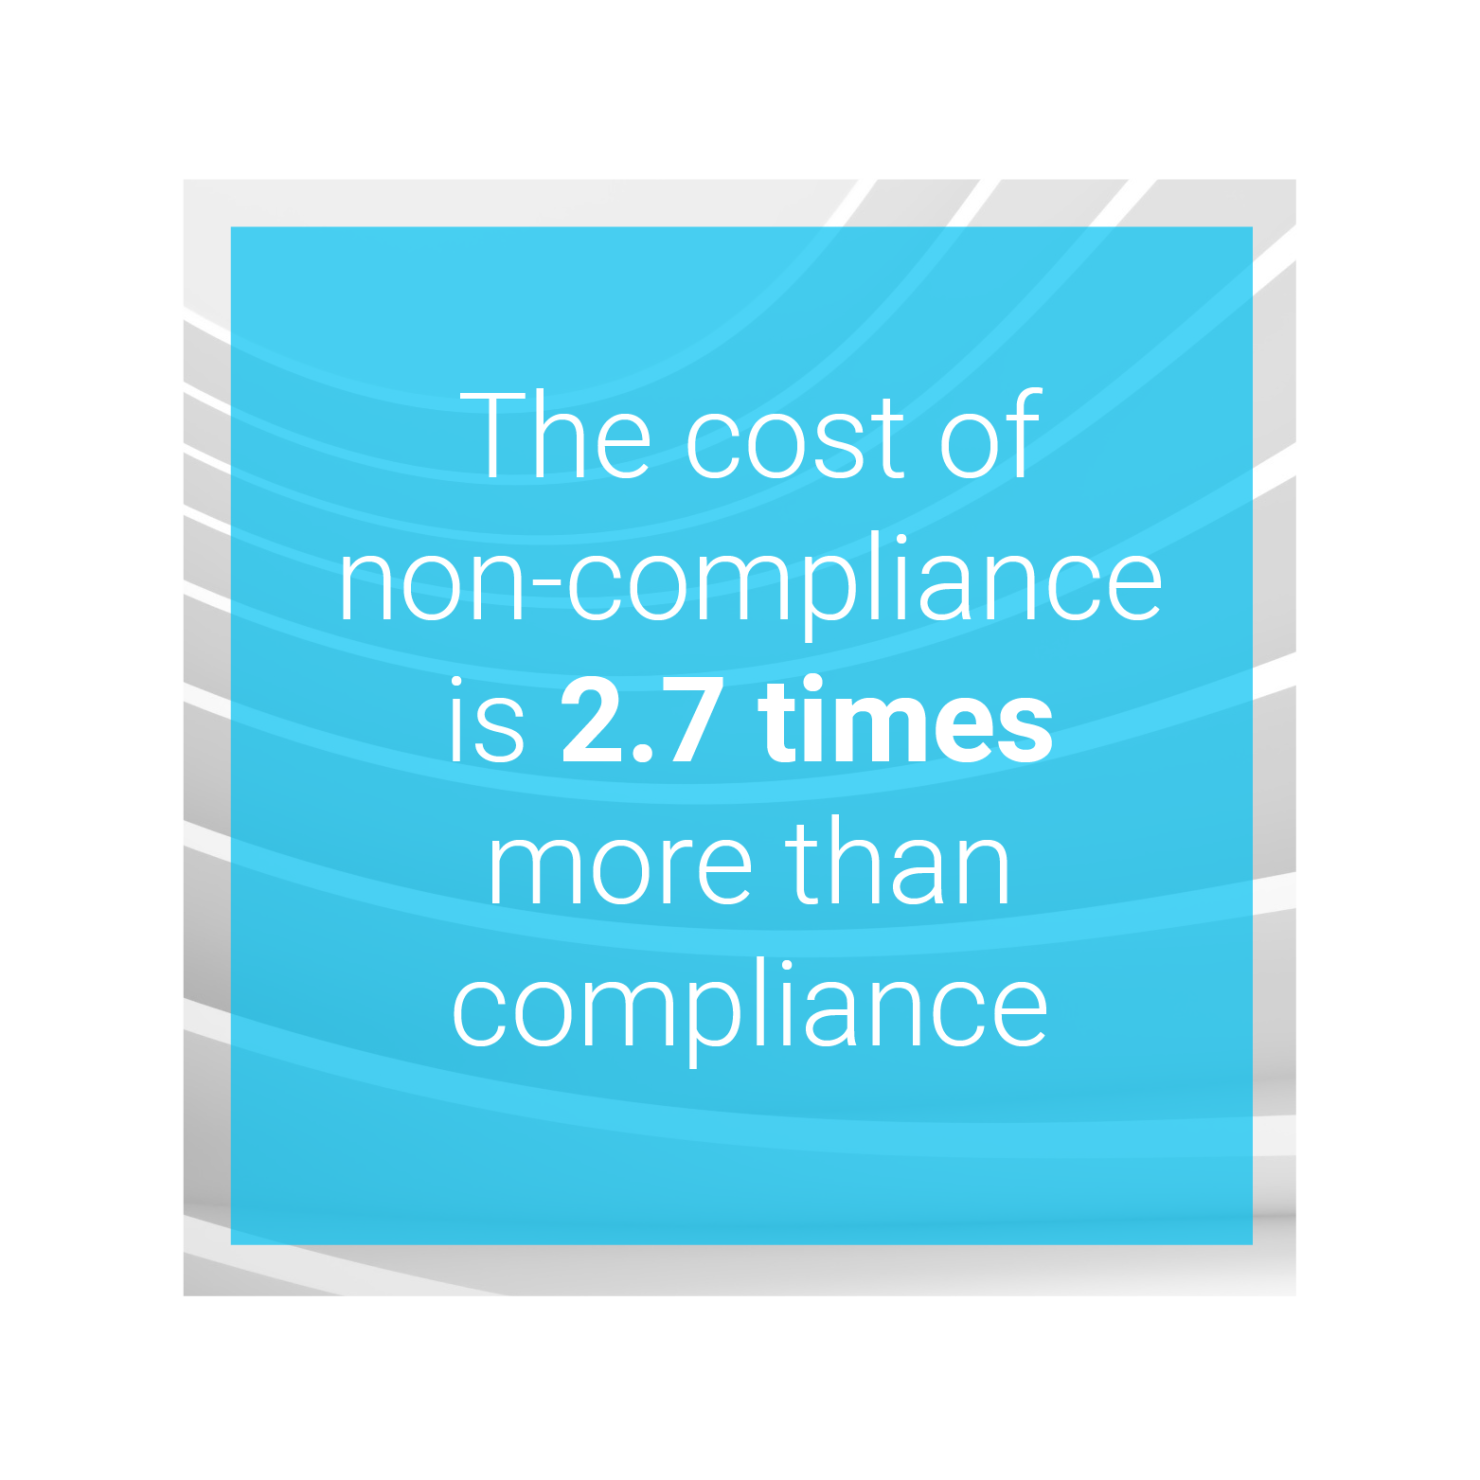 The cost of non-compliance is 2.7 times more than compliance